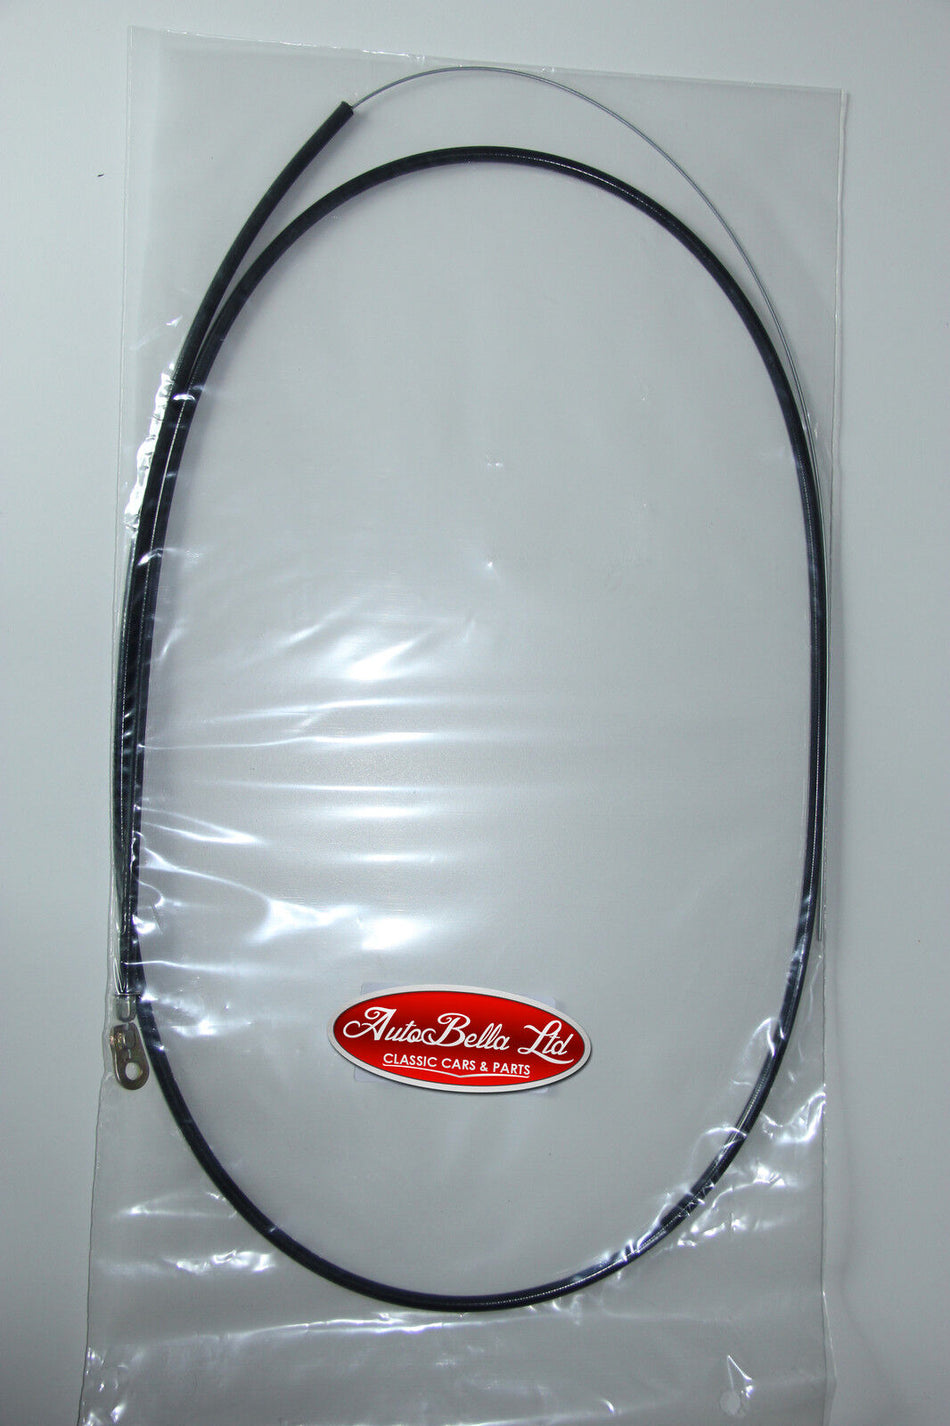 CLASSIC FIAT 500 D F L CHOKE CABLE (Round speedo and square speedo) - BRAND NEW